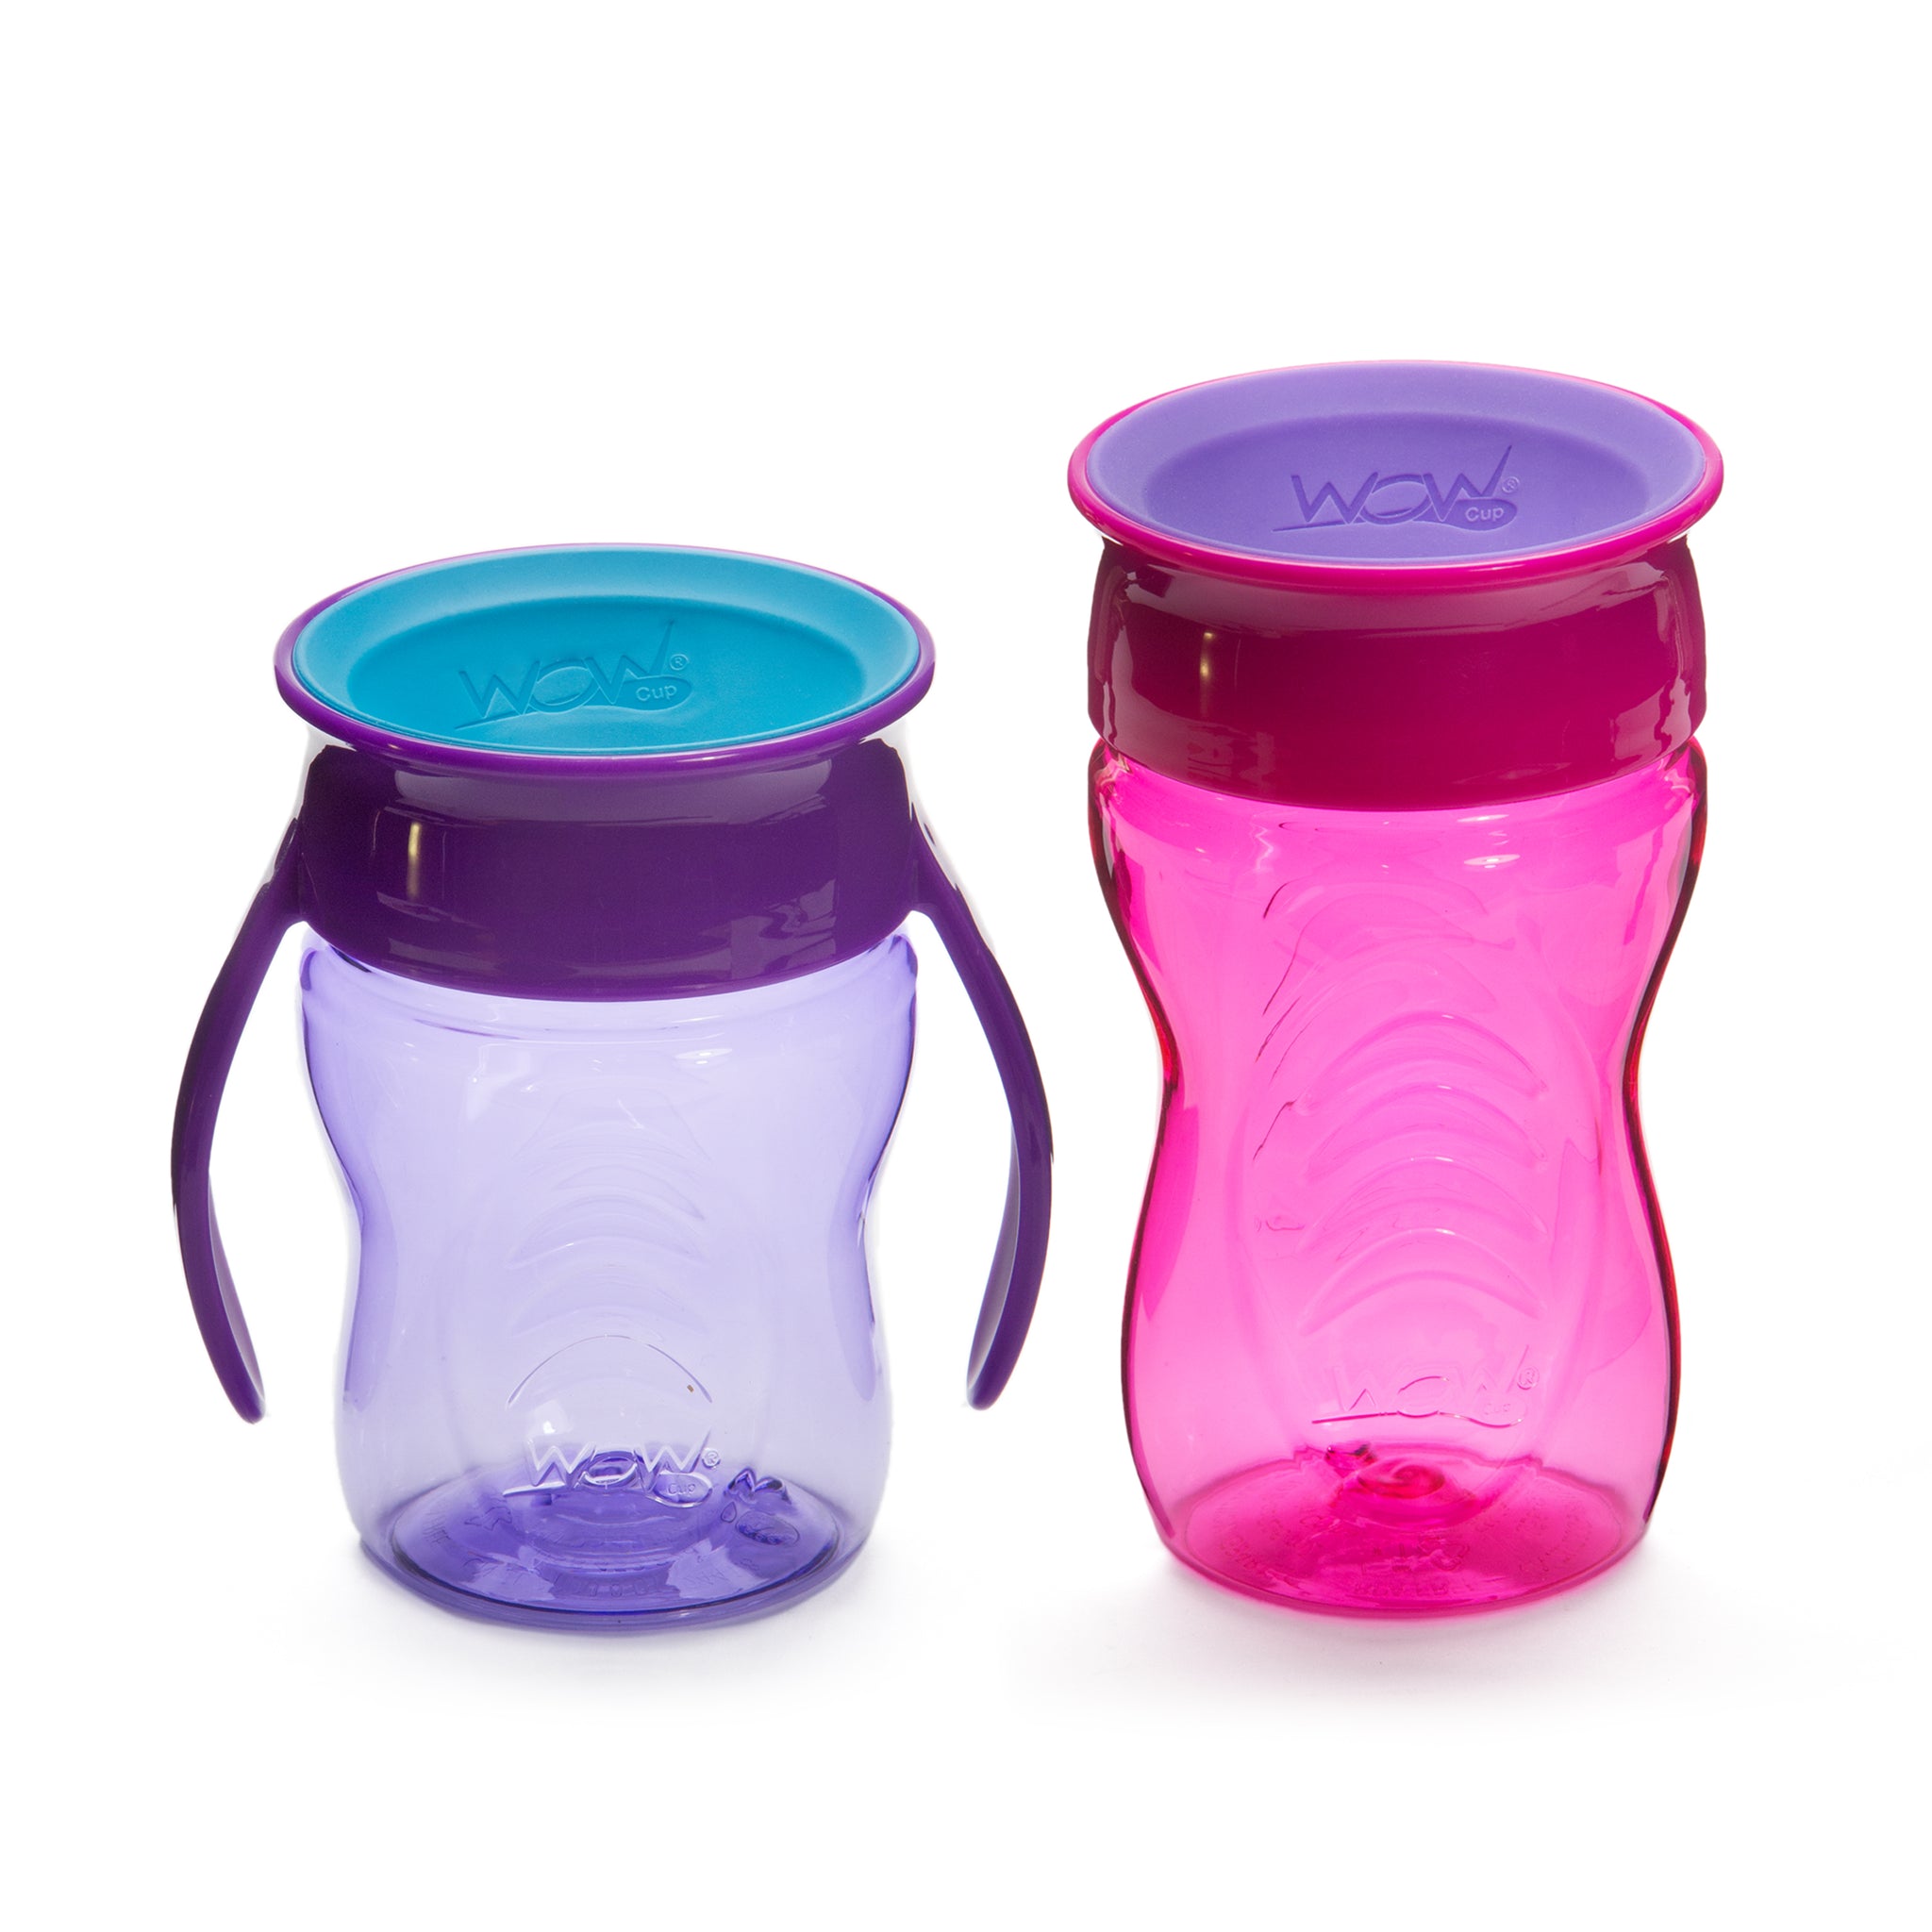 taxi Woord Enzovoorts WOW CUP Stages Two-Pack - Pink Kids and Purple Baby Cups - WOW GEAR